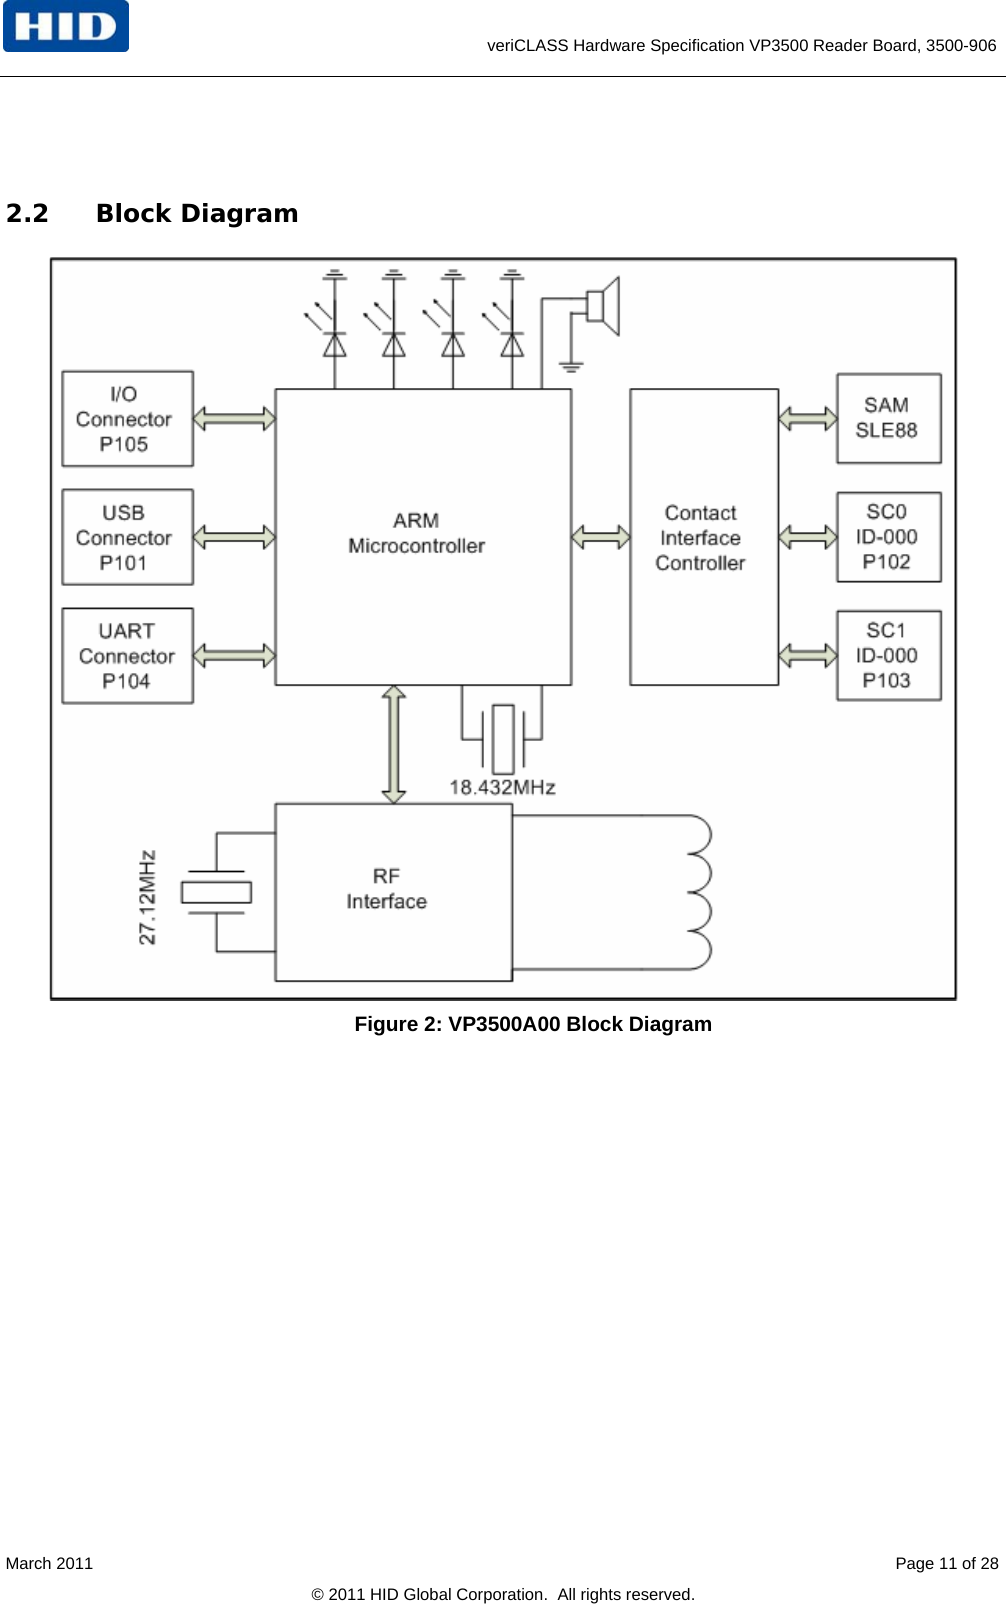      veriCLASS Hardware Specification VP3500 Reader Board, 3500-906  2.2 Block Diagram   Figure 2: VP3500A00 Block Diagram  March 2011    Page 11 of 28 © 2011 HID Global Corporation.  All rights reserved. 